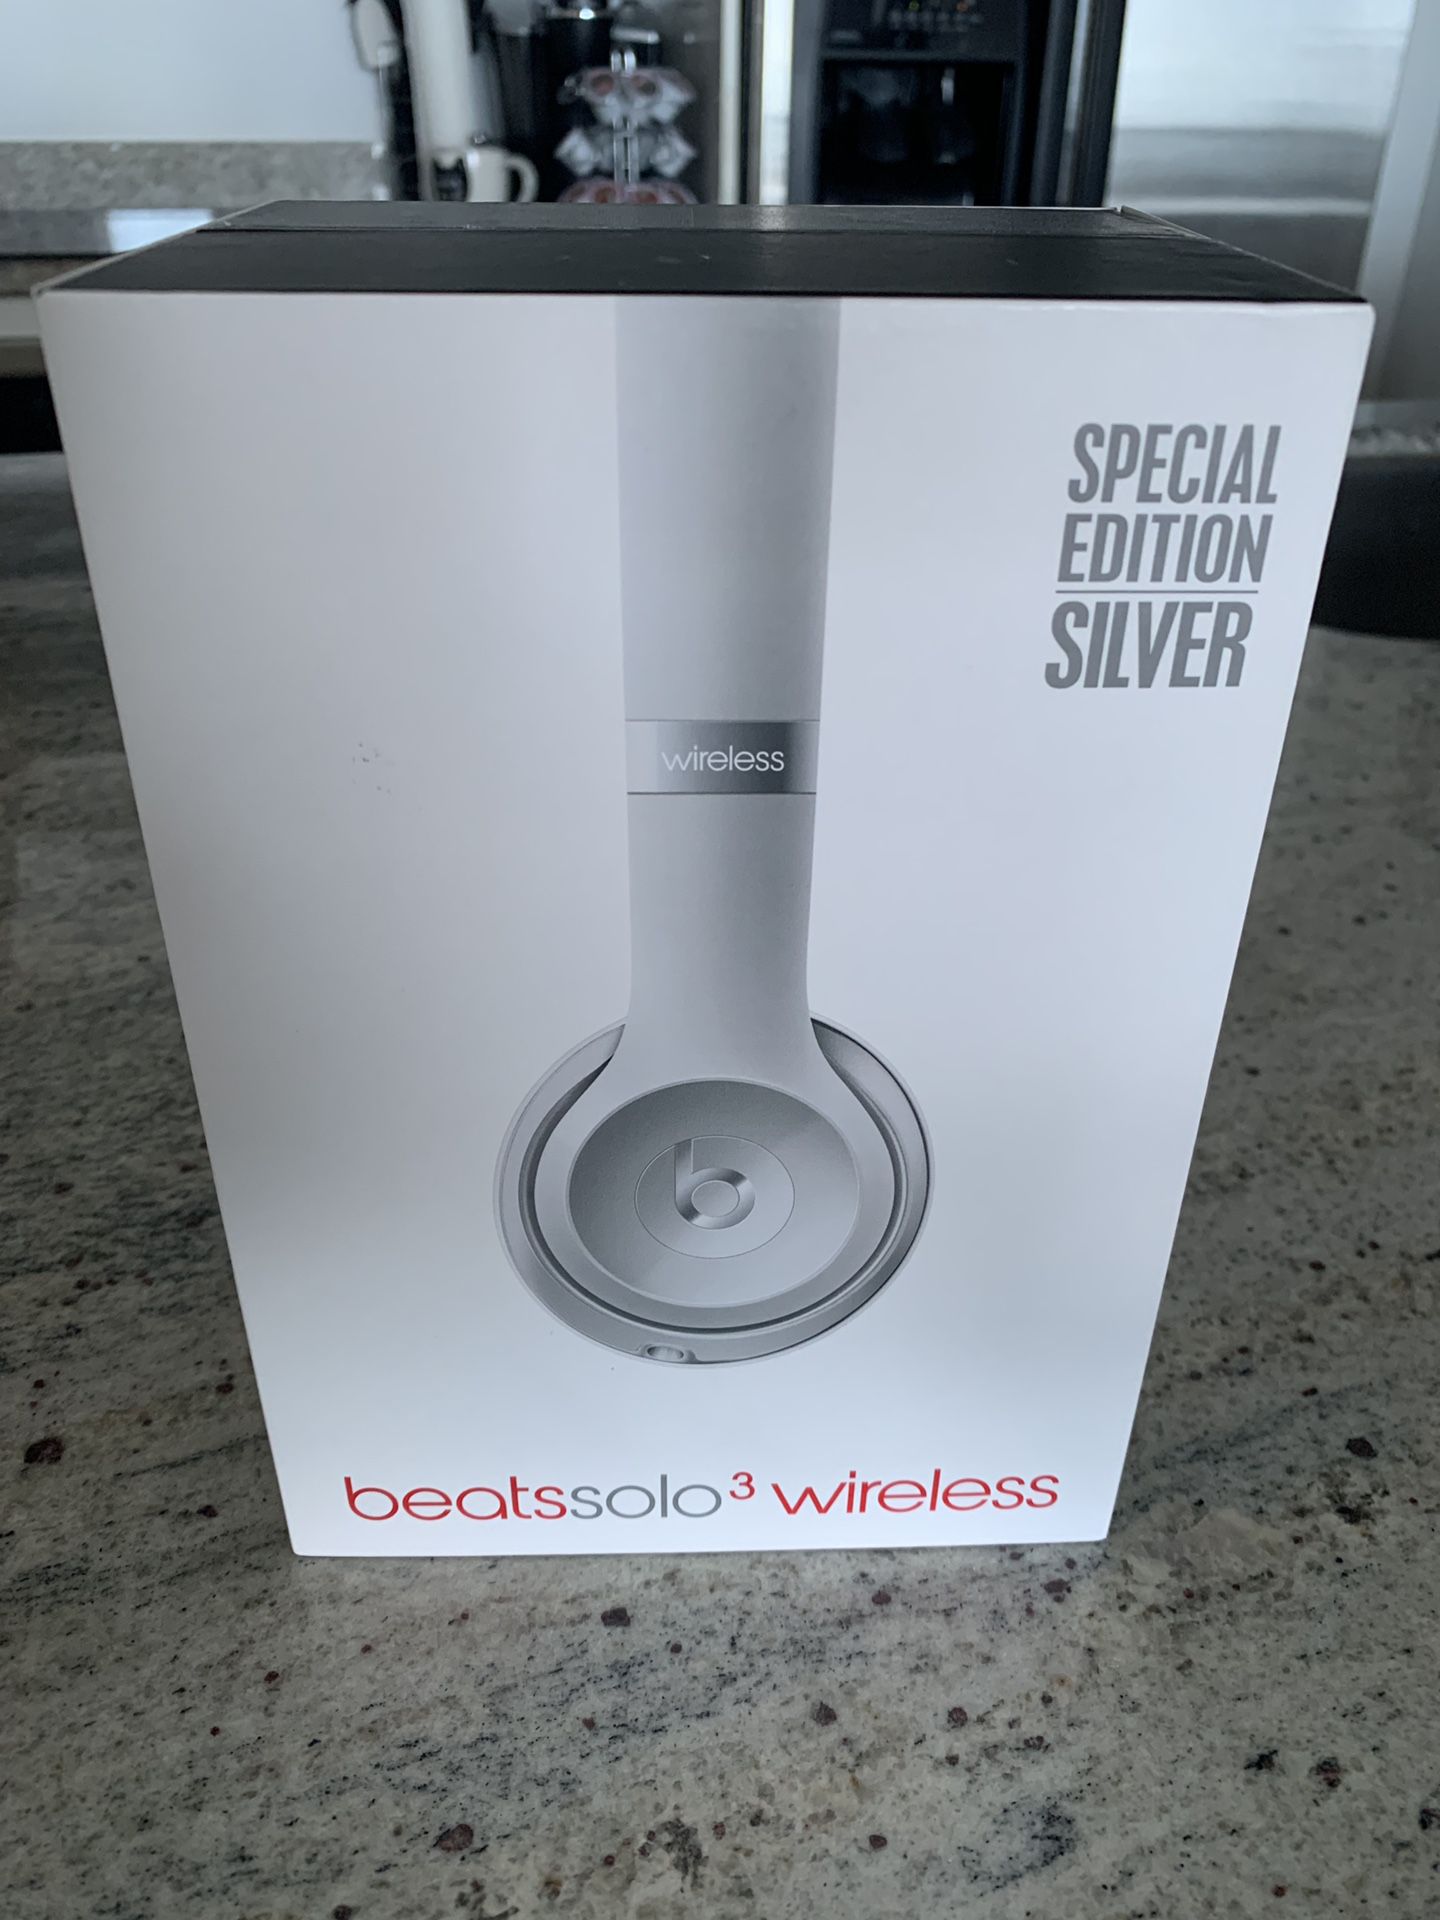 Beat by Dre, beats solo 3 wireless headphones, Special Edition: Silver